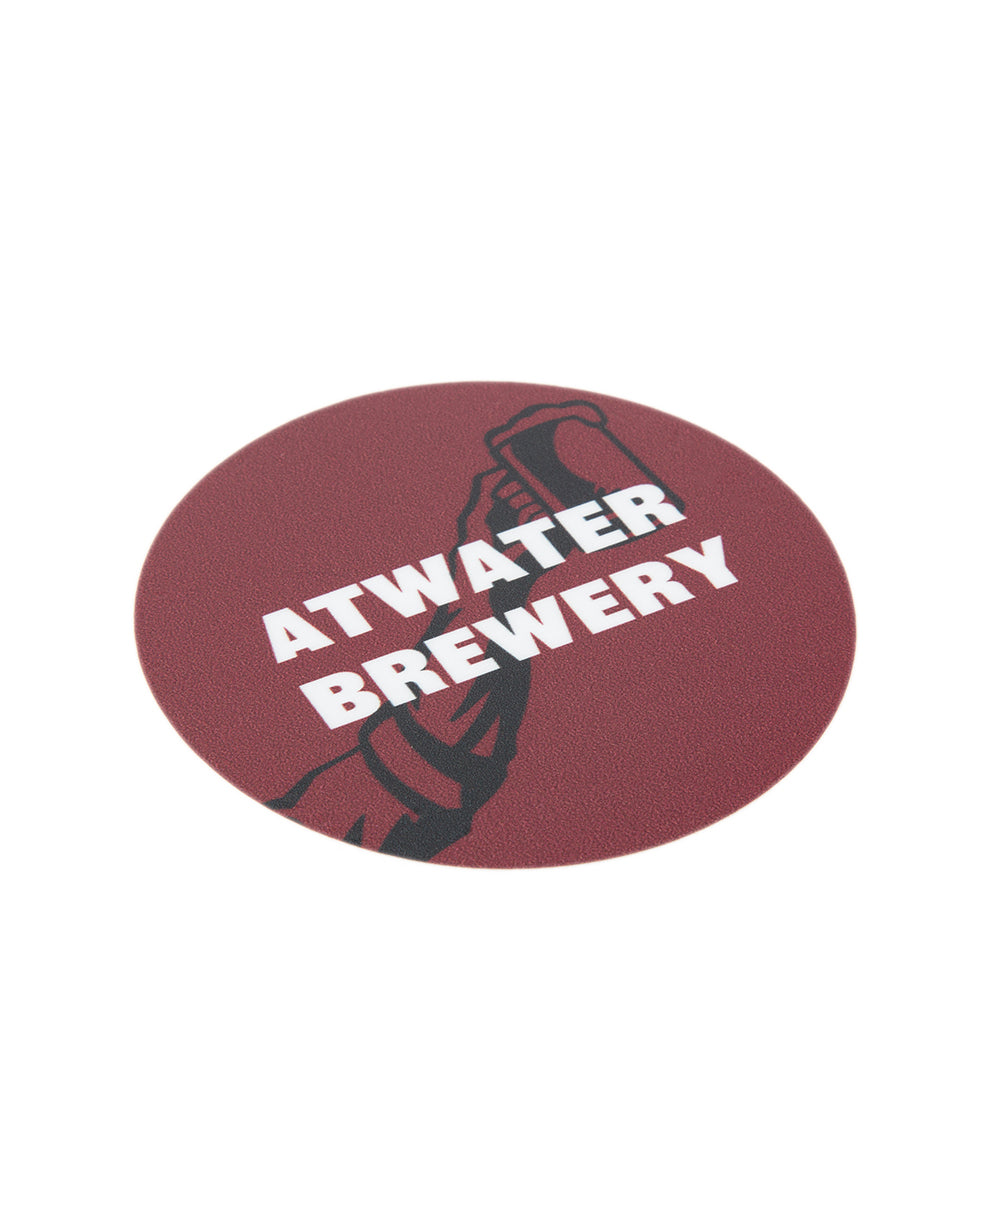 ATWATER BREWERY RED STICKER